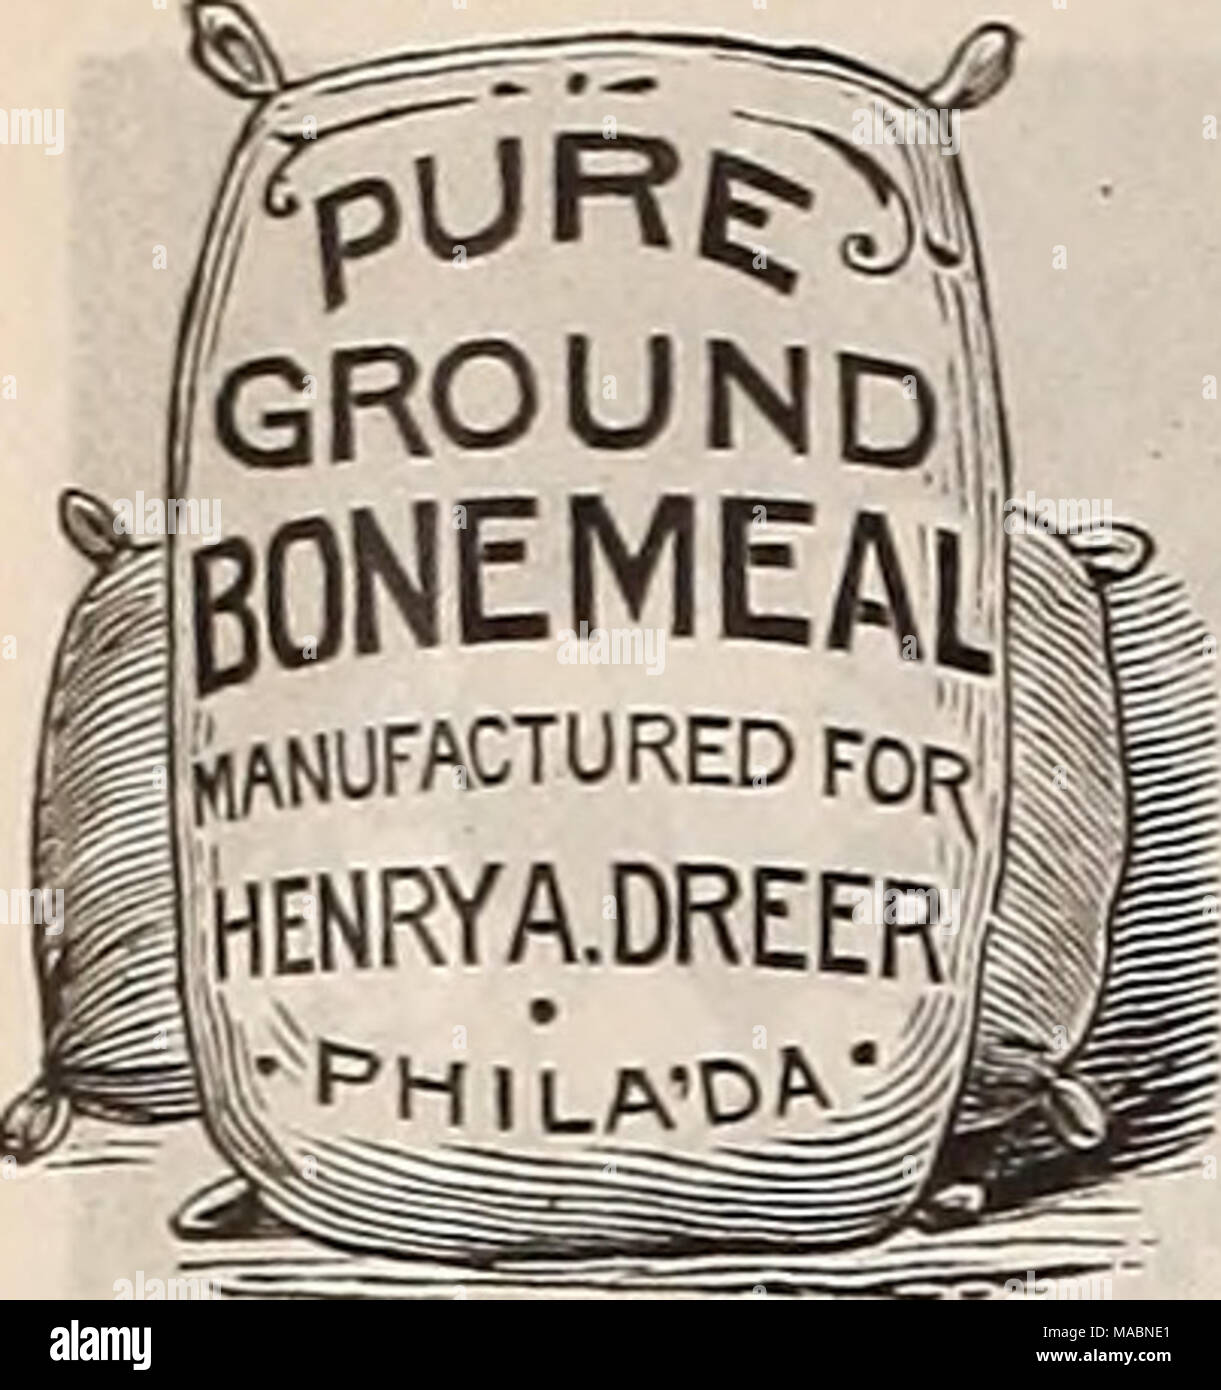 . Dreer's quarterly wholesale price list of seeds, plants, bulbs, &amp;c. : summer edition July 1895 August . FE-RTILIZEKS. DREER'S AMMONIATED BONE PHOSPHATE. A valuable fertilizer for the garden and farm, made from pure materials, and certain to give satisfactory results. Per sack of 200 lbs., $3.00 ; per ton, $27.00. CLAY'S FERTILIZER. Highly recommended for all purposes in the vegetable, fruit and flower garden, specially adapted in rose forcing. In sacks as im- ported,  cwt. $2.00 ; I cwt. $3.50 ; 1 cwt. $6.25. 1 CANADA TJNLE ACHED HARDWOOD ASHES. Per bbl. (about 250 lbs.), $2.50 ; per to Stock Photo